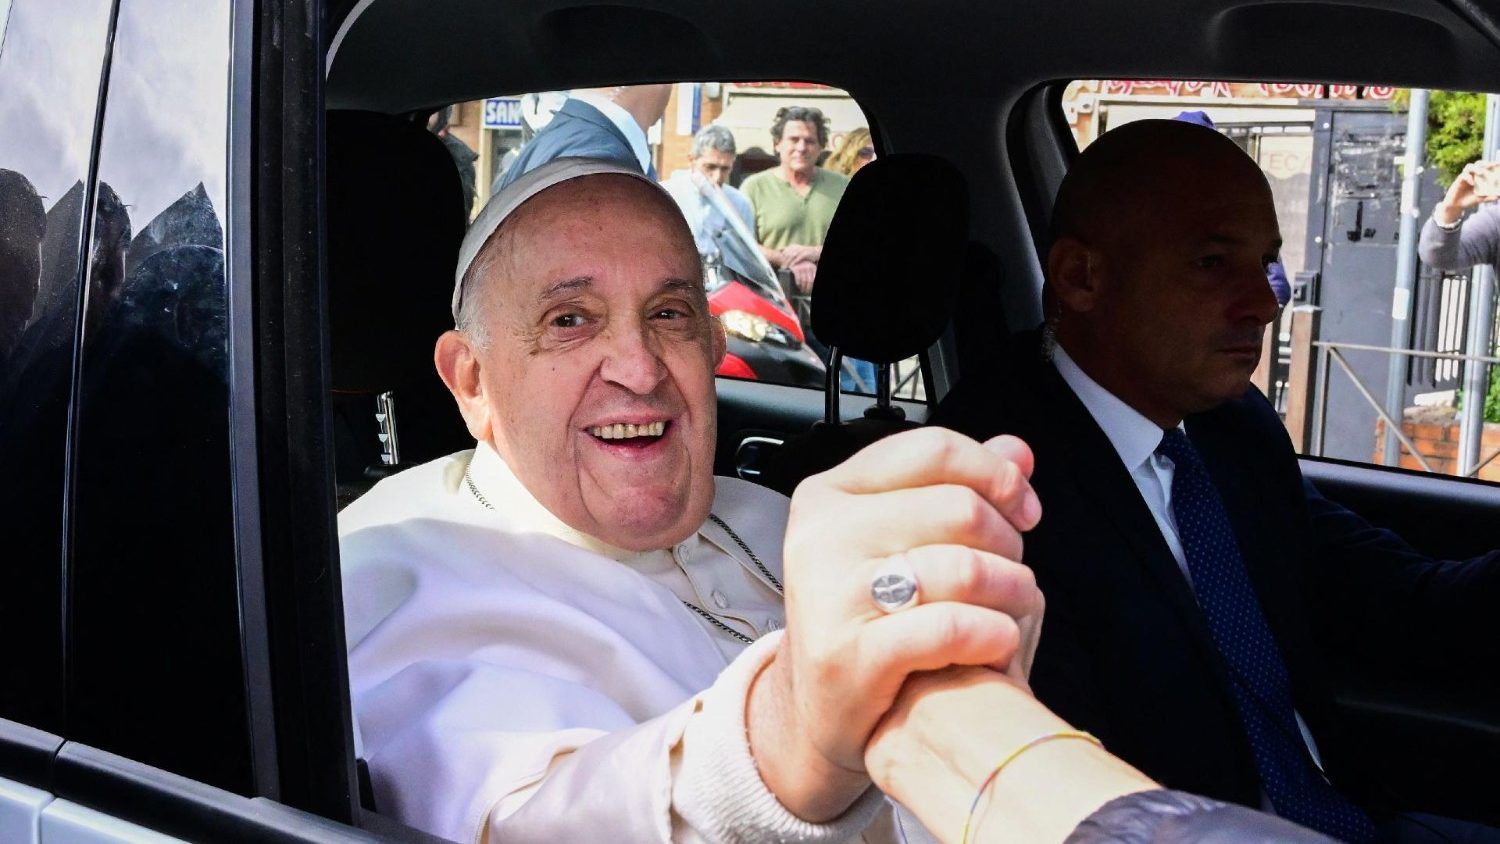 Pope Francis returns to the Vatican after 3 days in the hospital